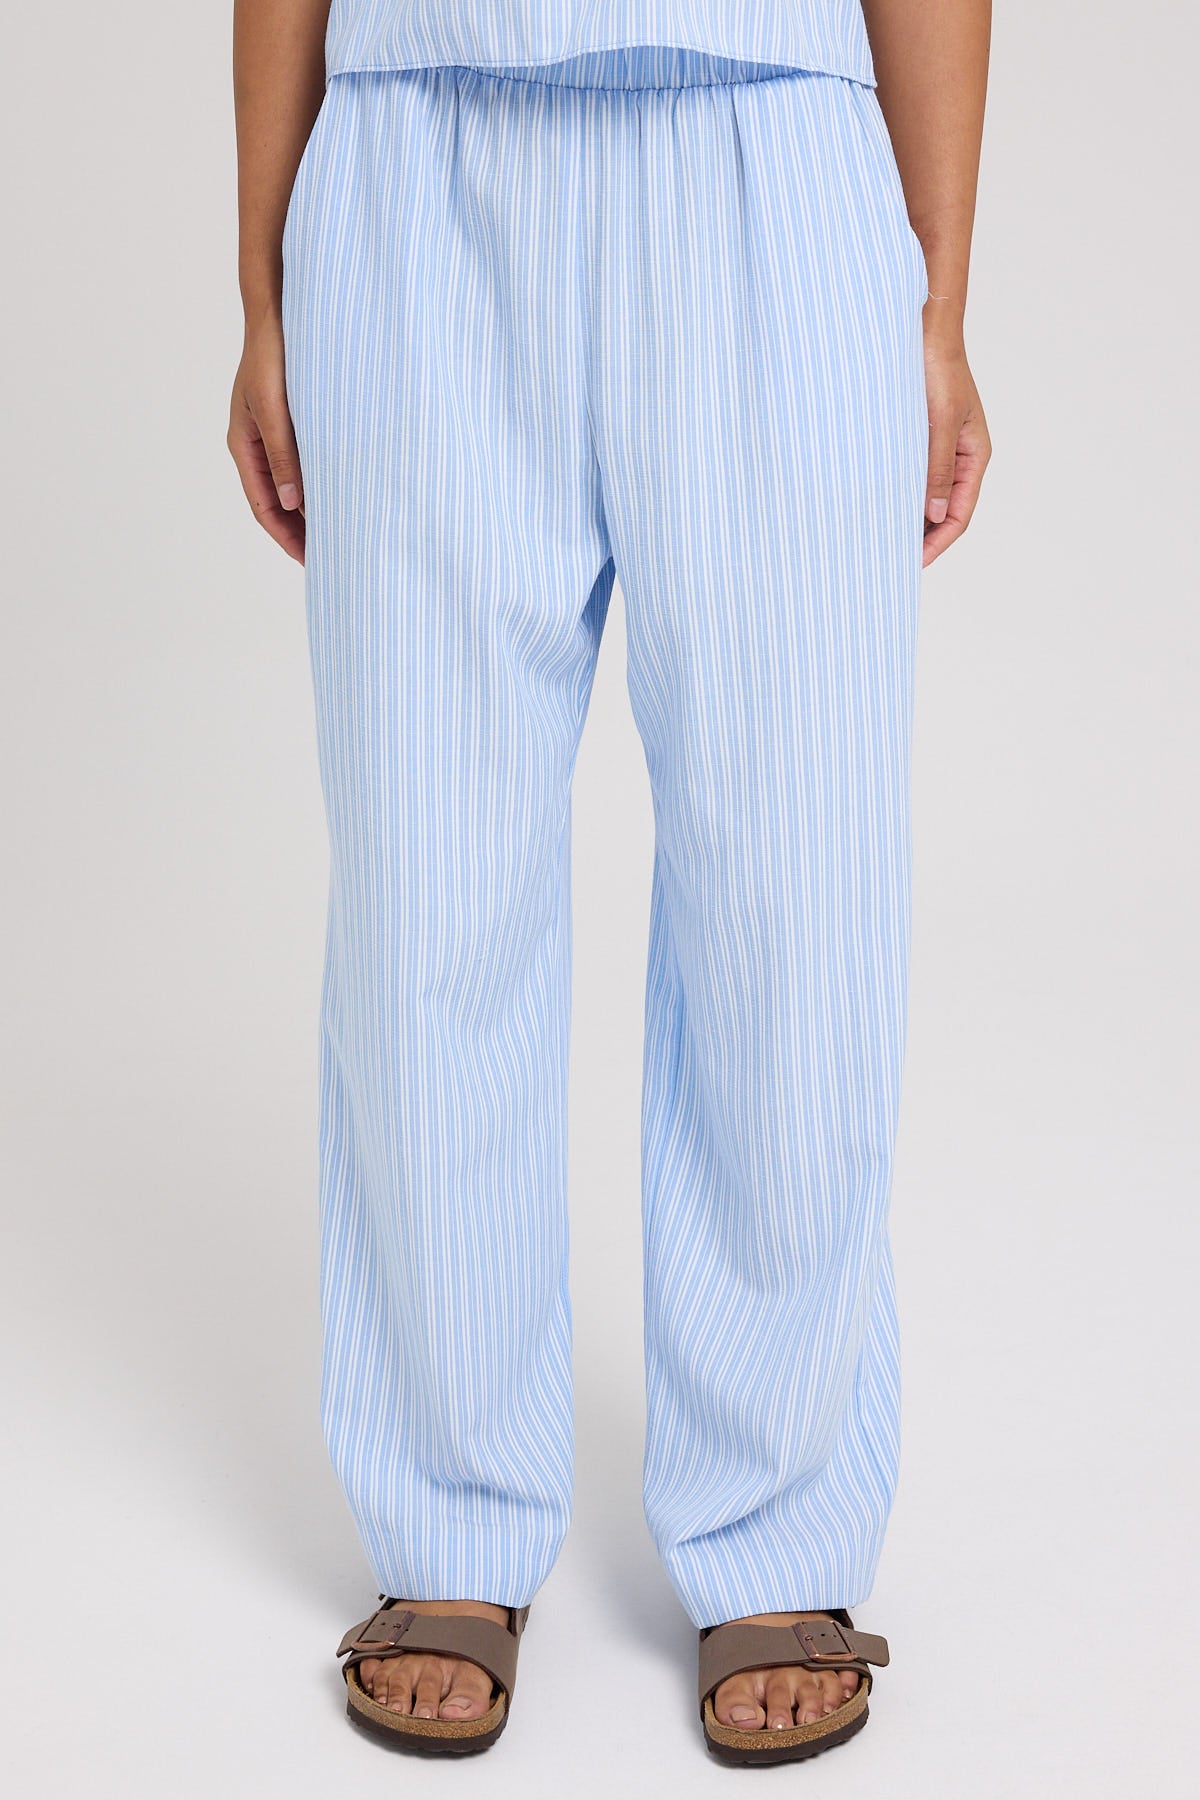 Luck & Trouble Sky Stripe Elasticated Pant Blue Stripe – Universal Store